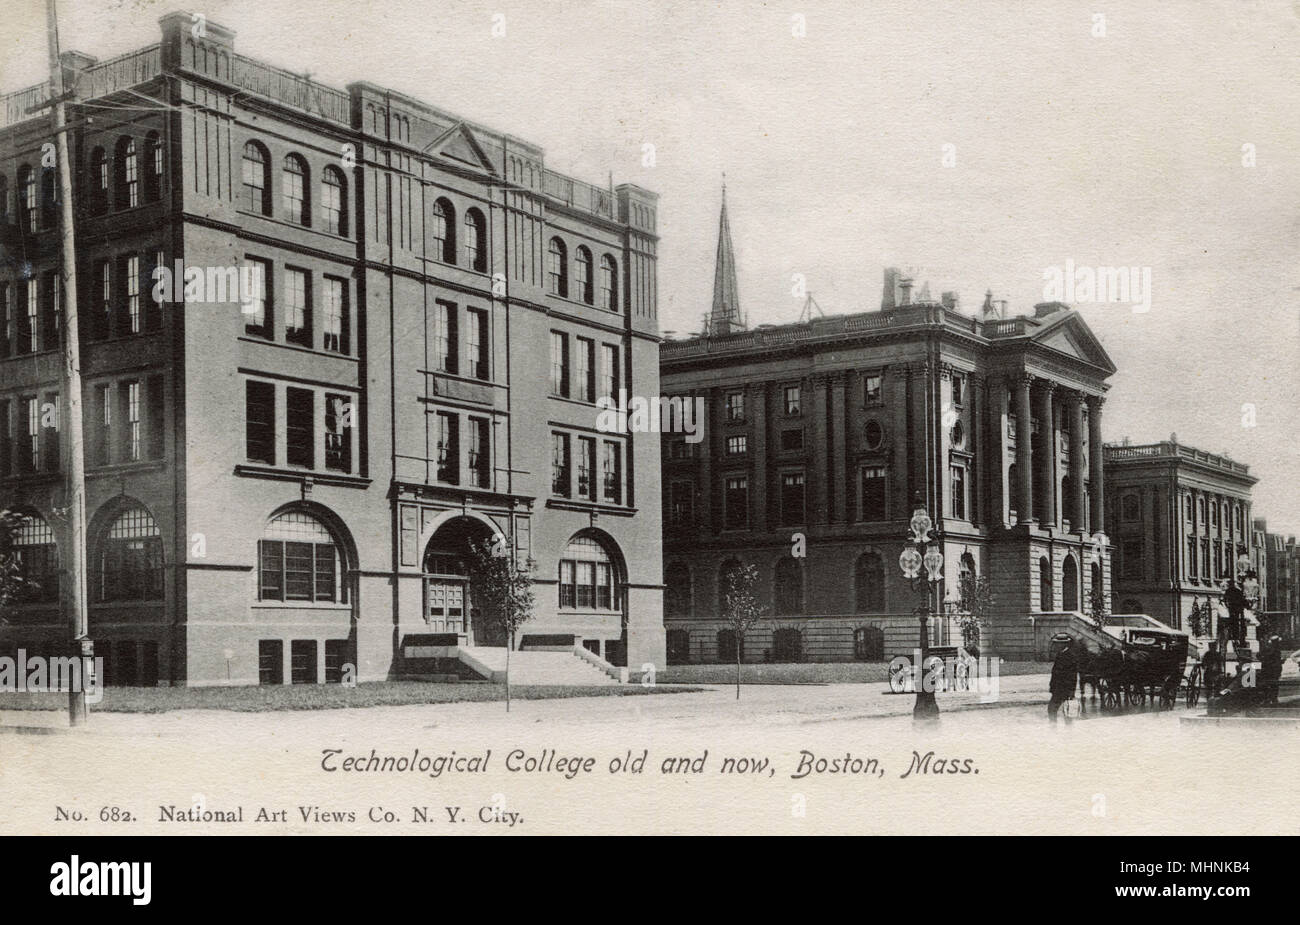 Technological College - Old and New - Boston, Massachusetts Stock Photo